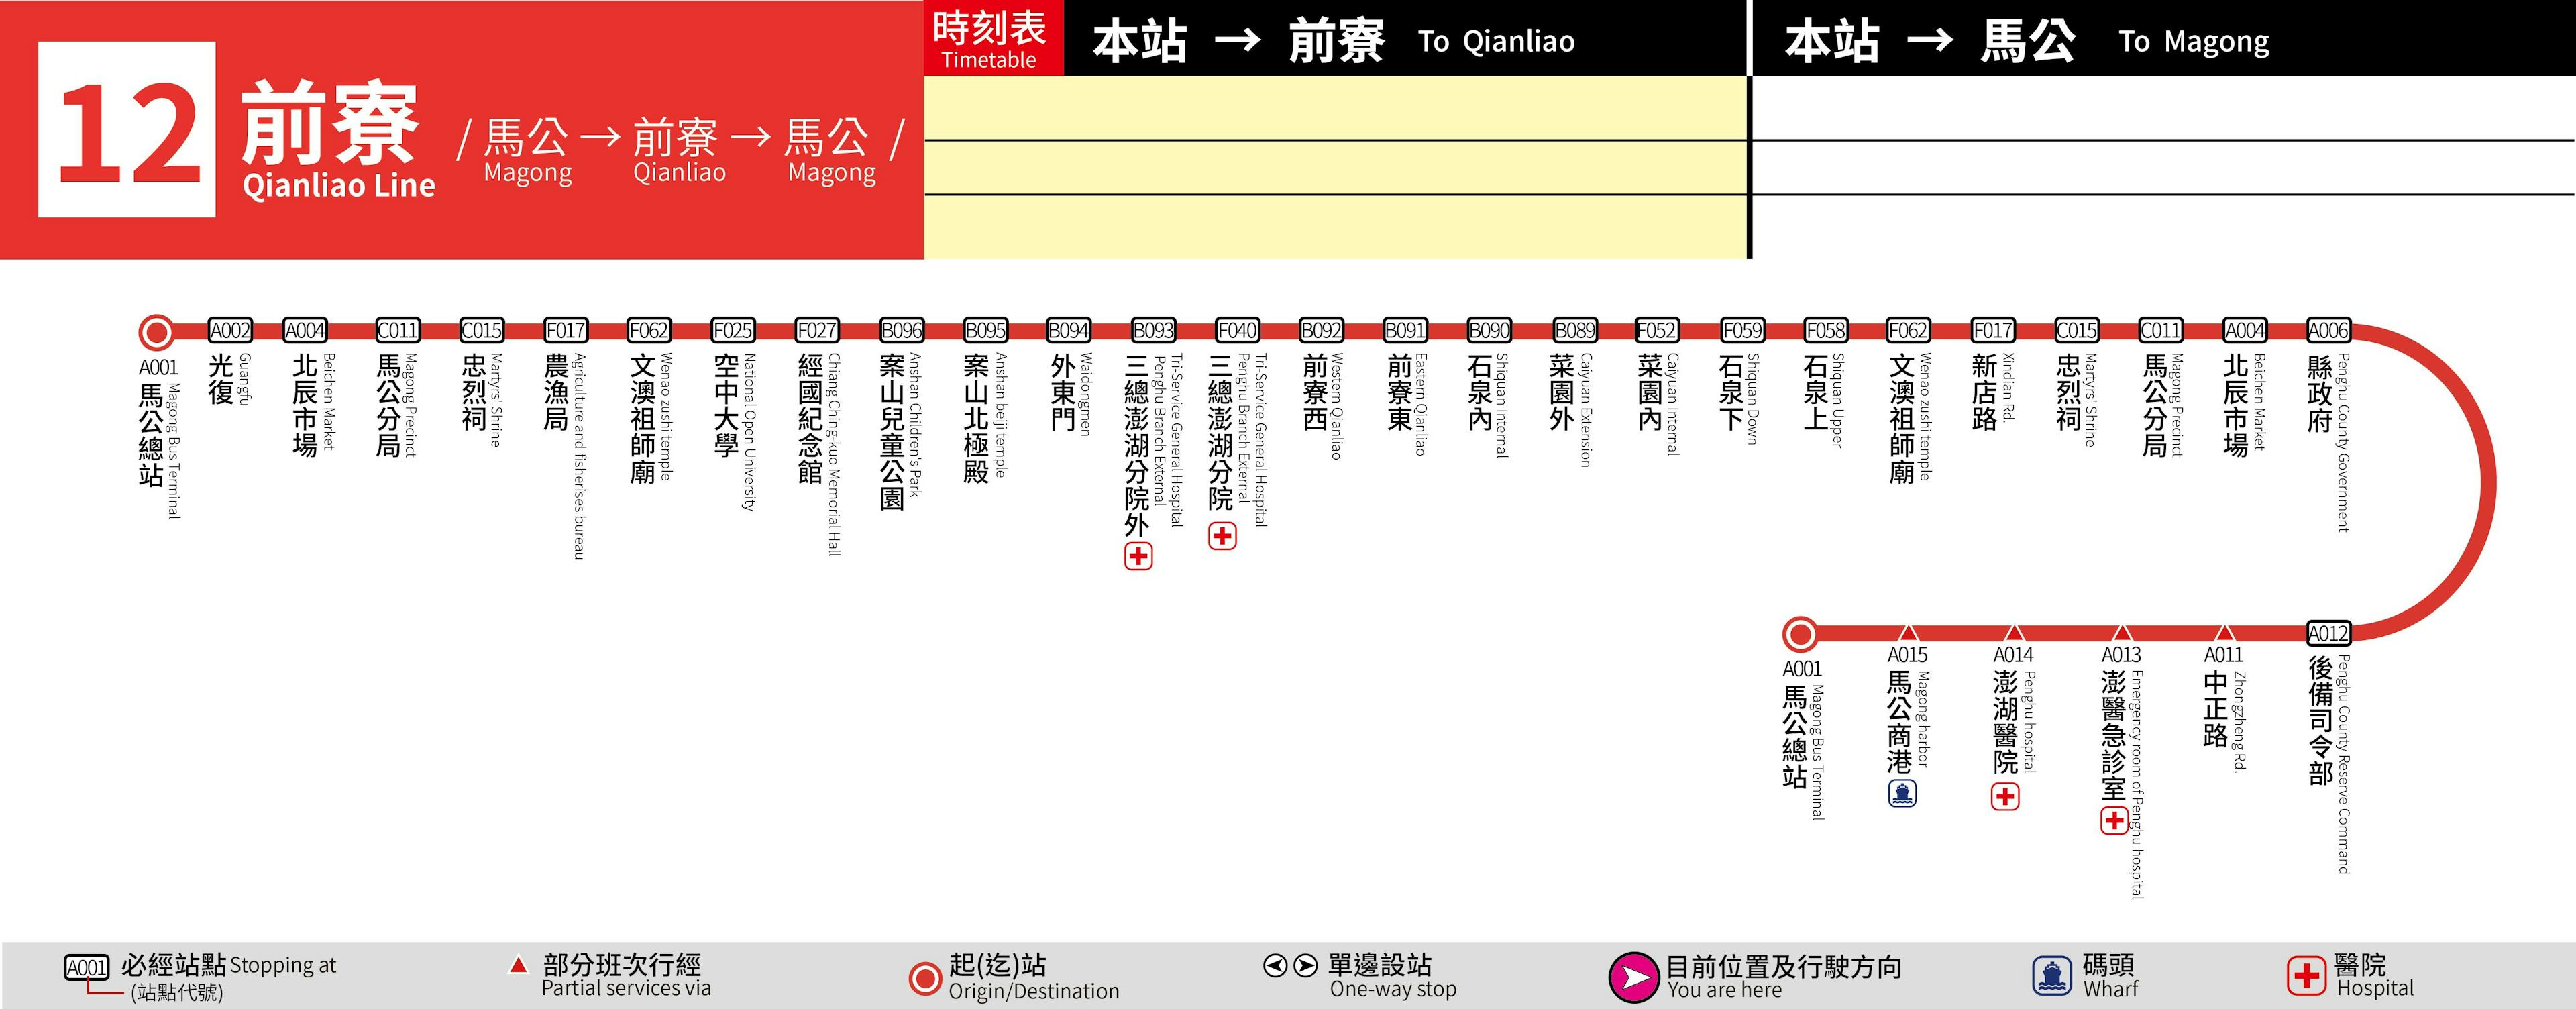 12Route Map-澎湖 Bus